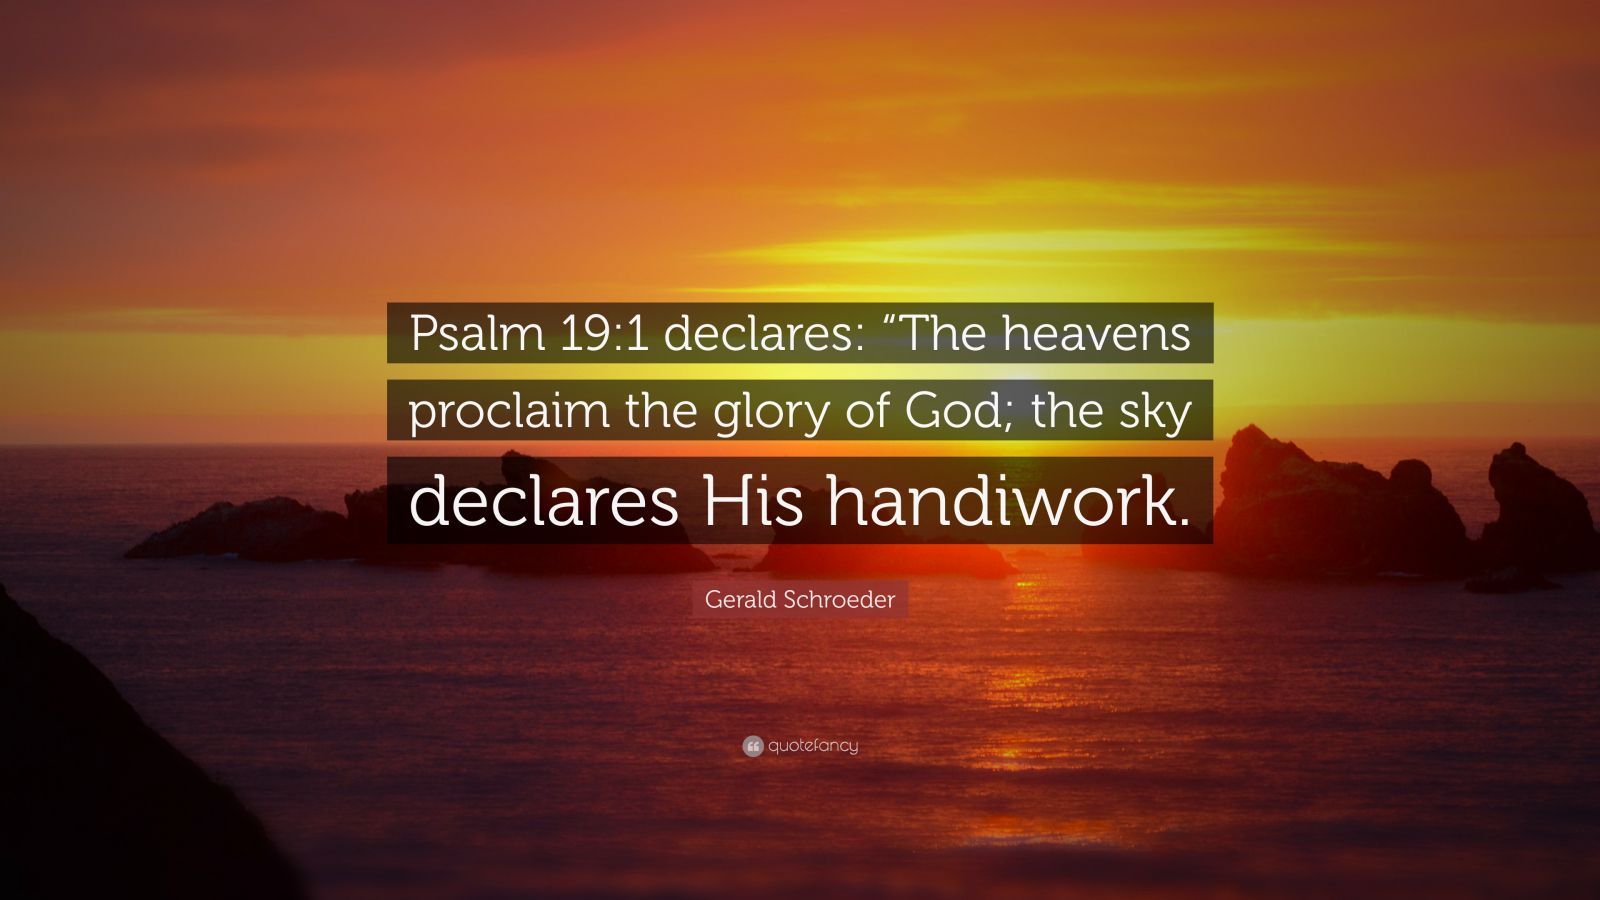 The heavens declare the glory of God Psalm 19 1080p 